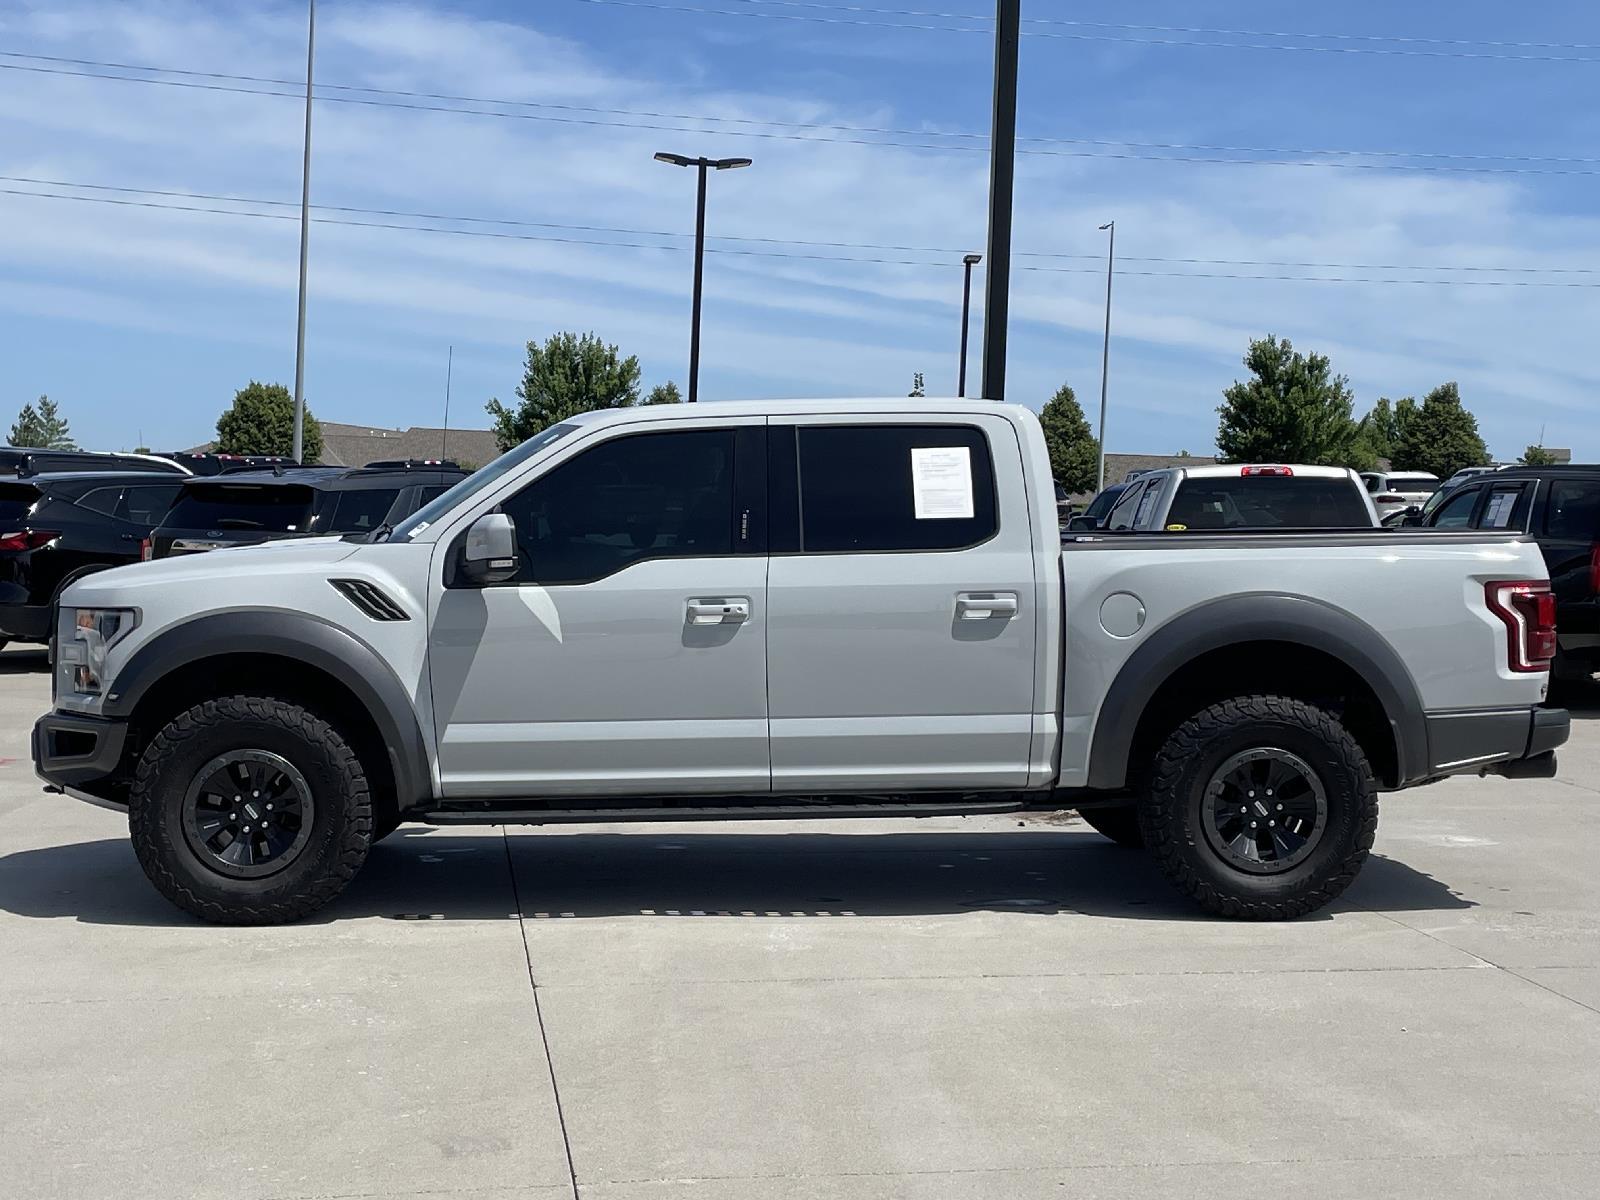 Used 2017 Ford F-150 Raptor Crew Cab Truck for sale in Lincoln NE